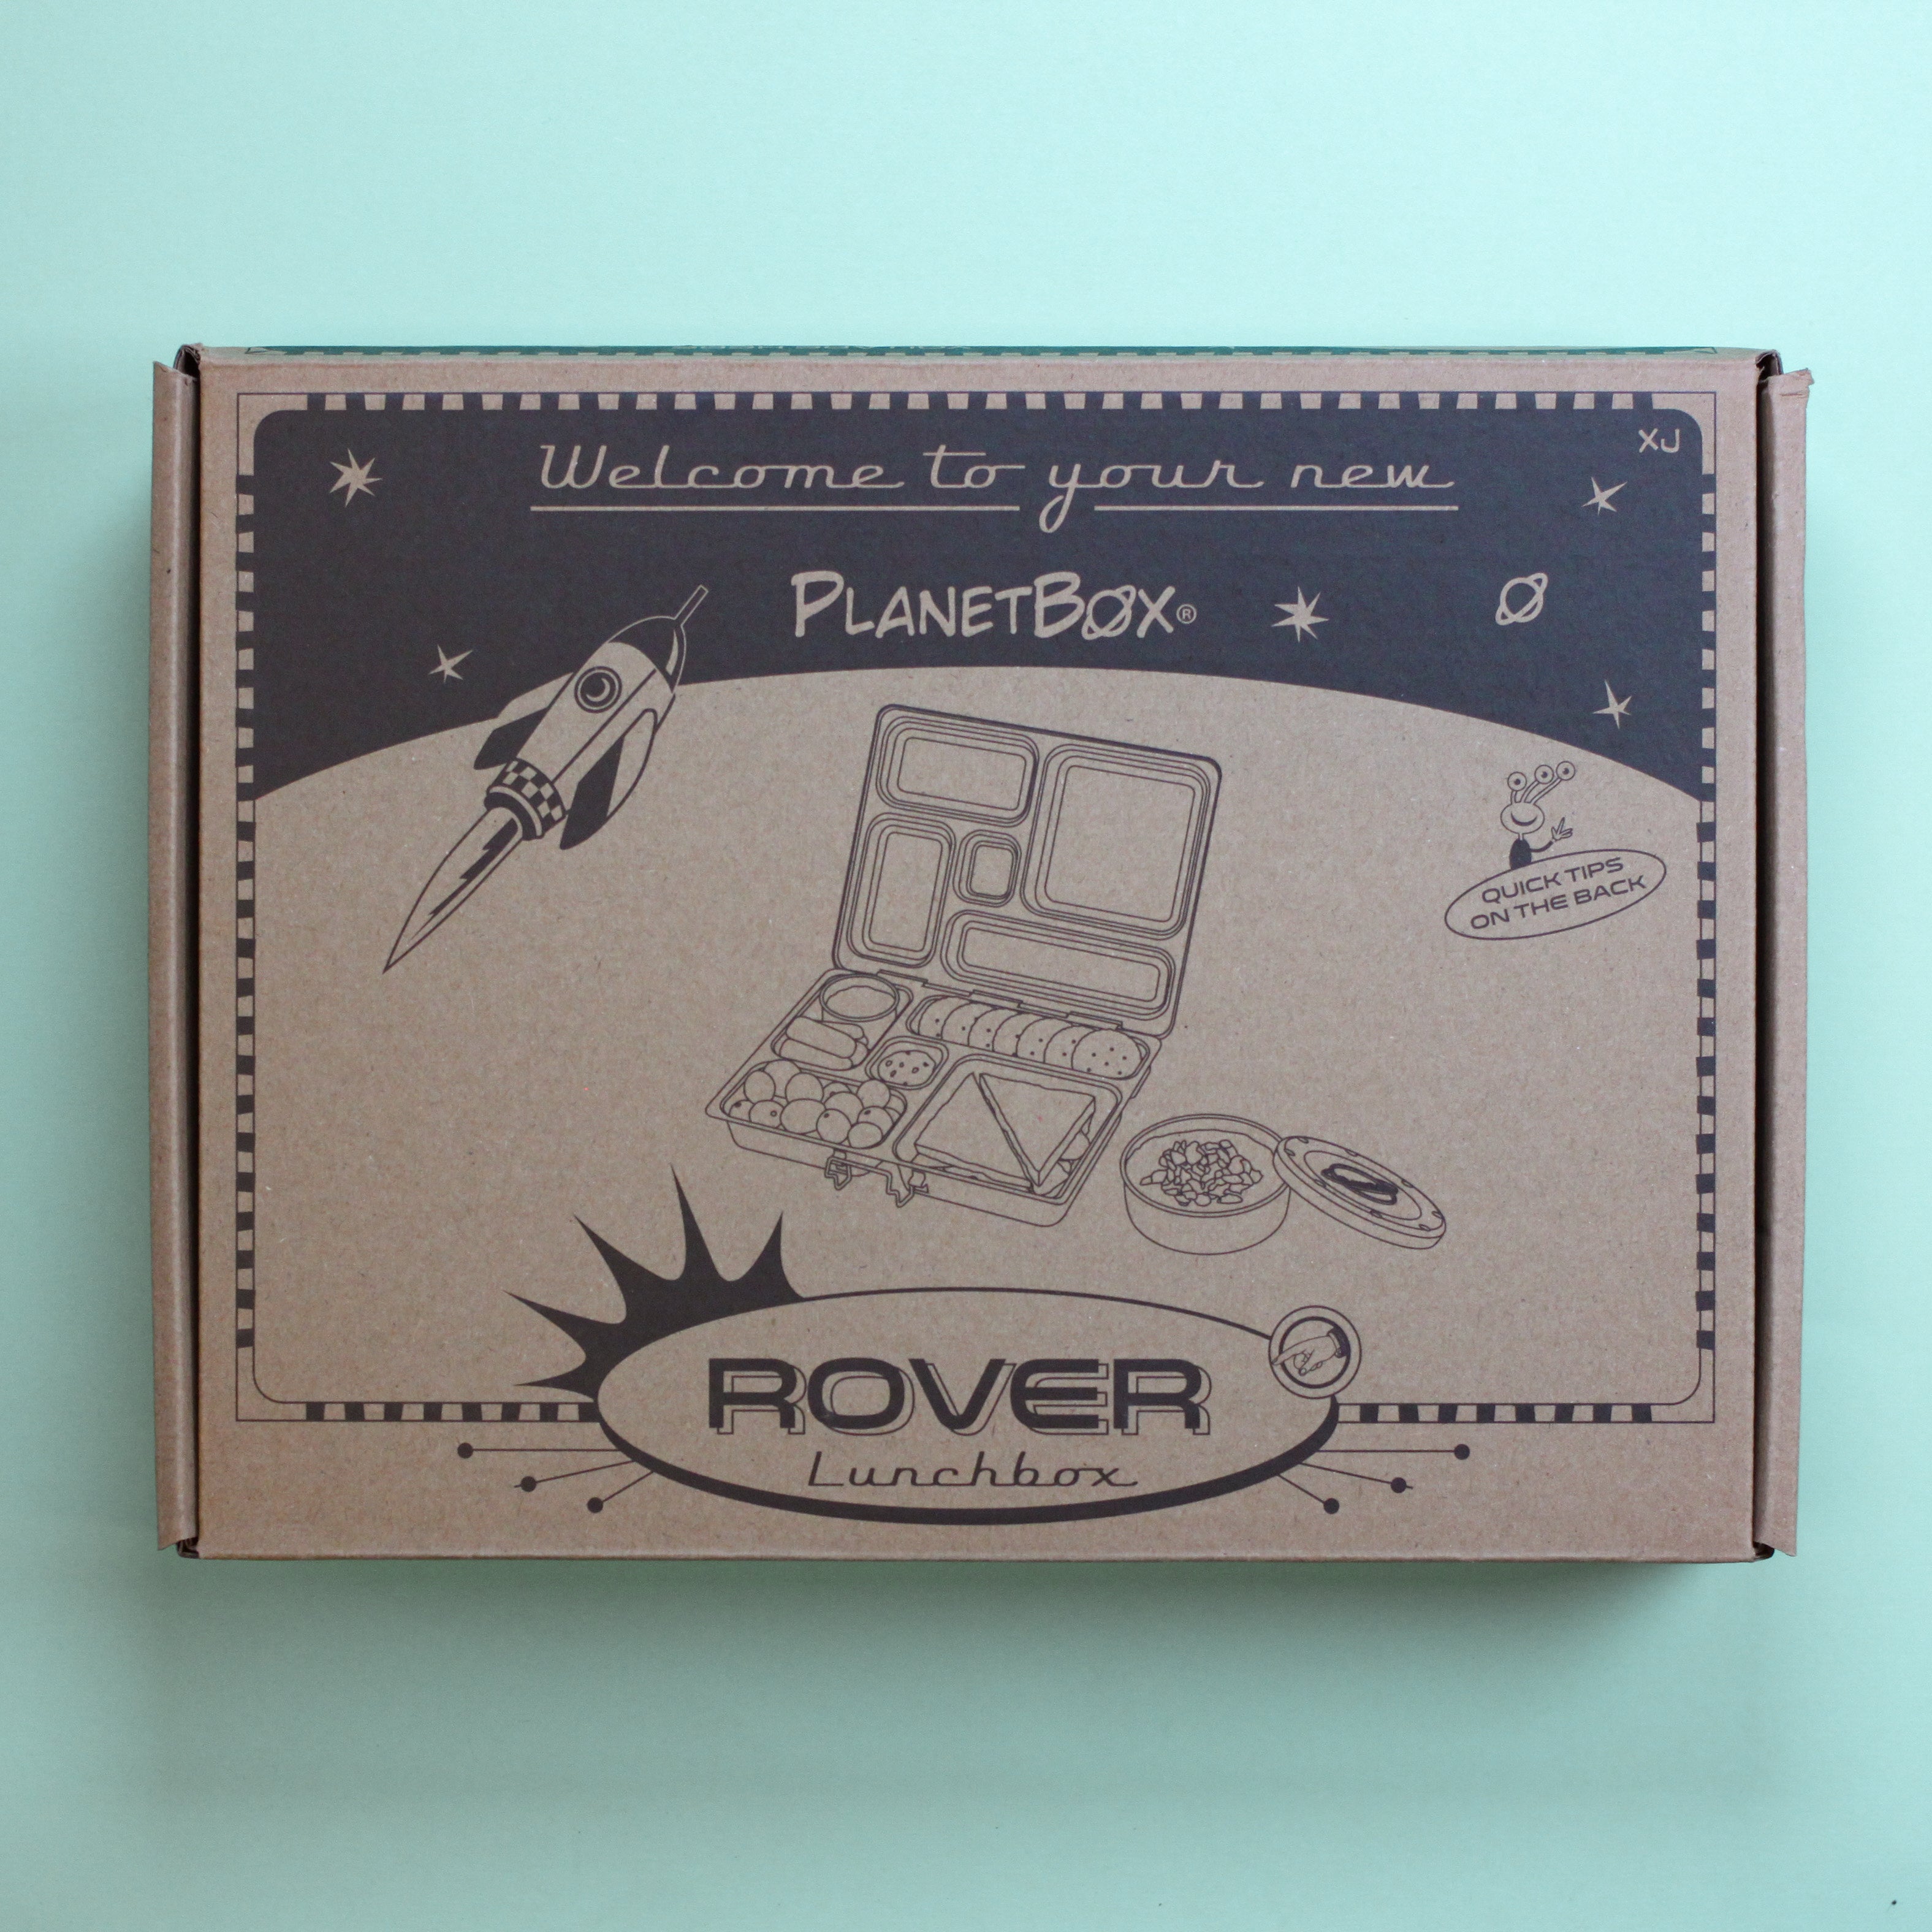 PlanetBox Rover Lunchbox